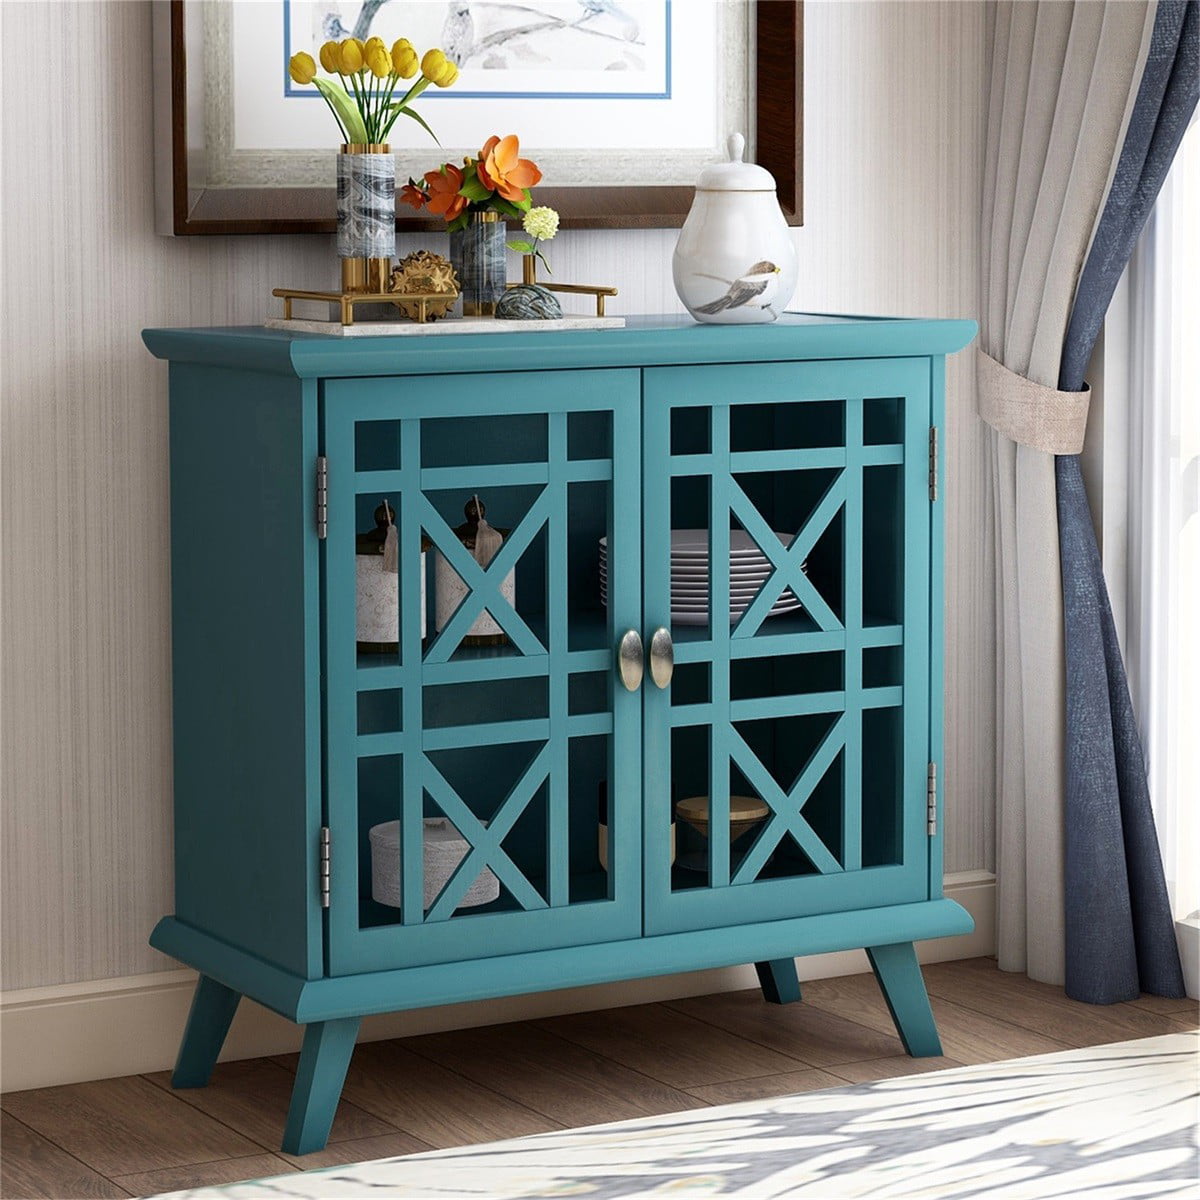 SENTERN Console Table with Adjustable Shelf Accent Storage Cabinet for